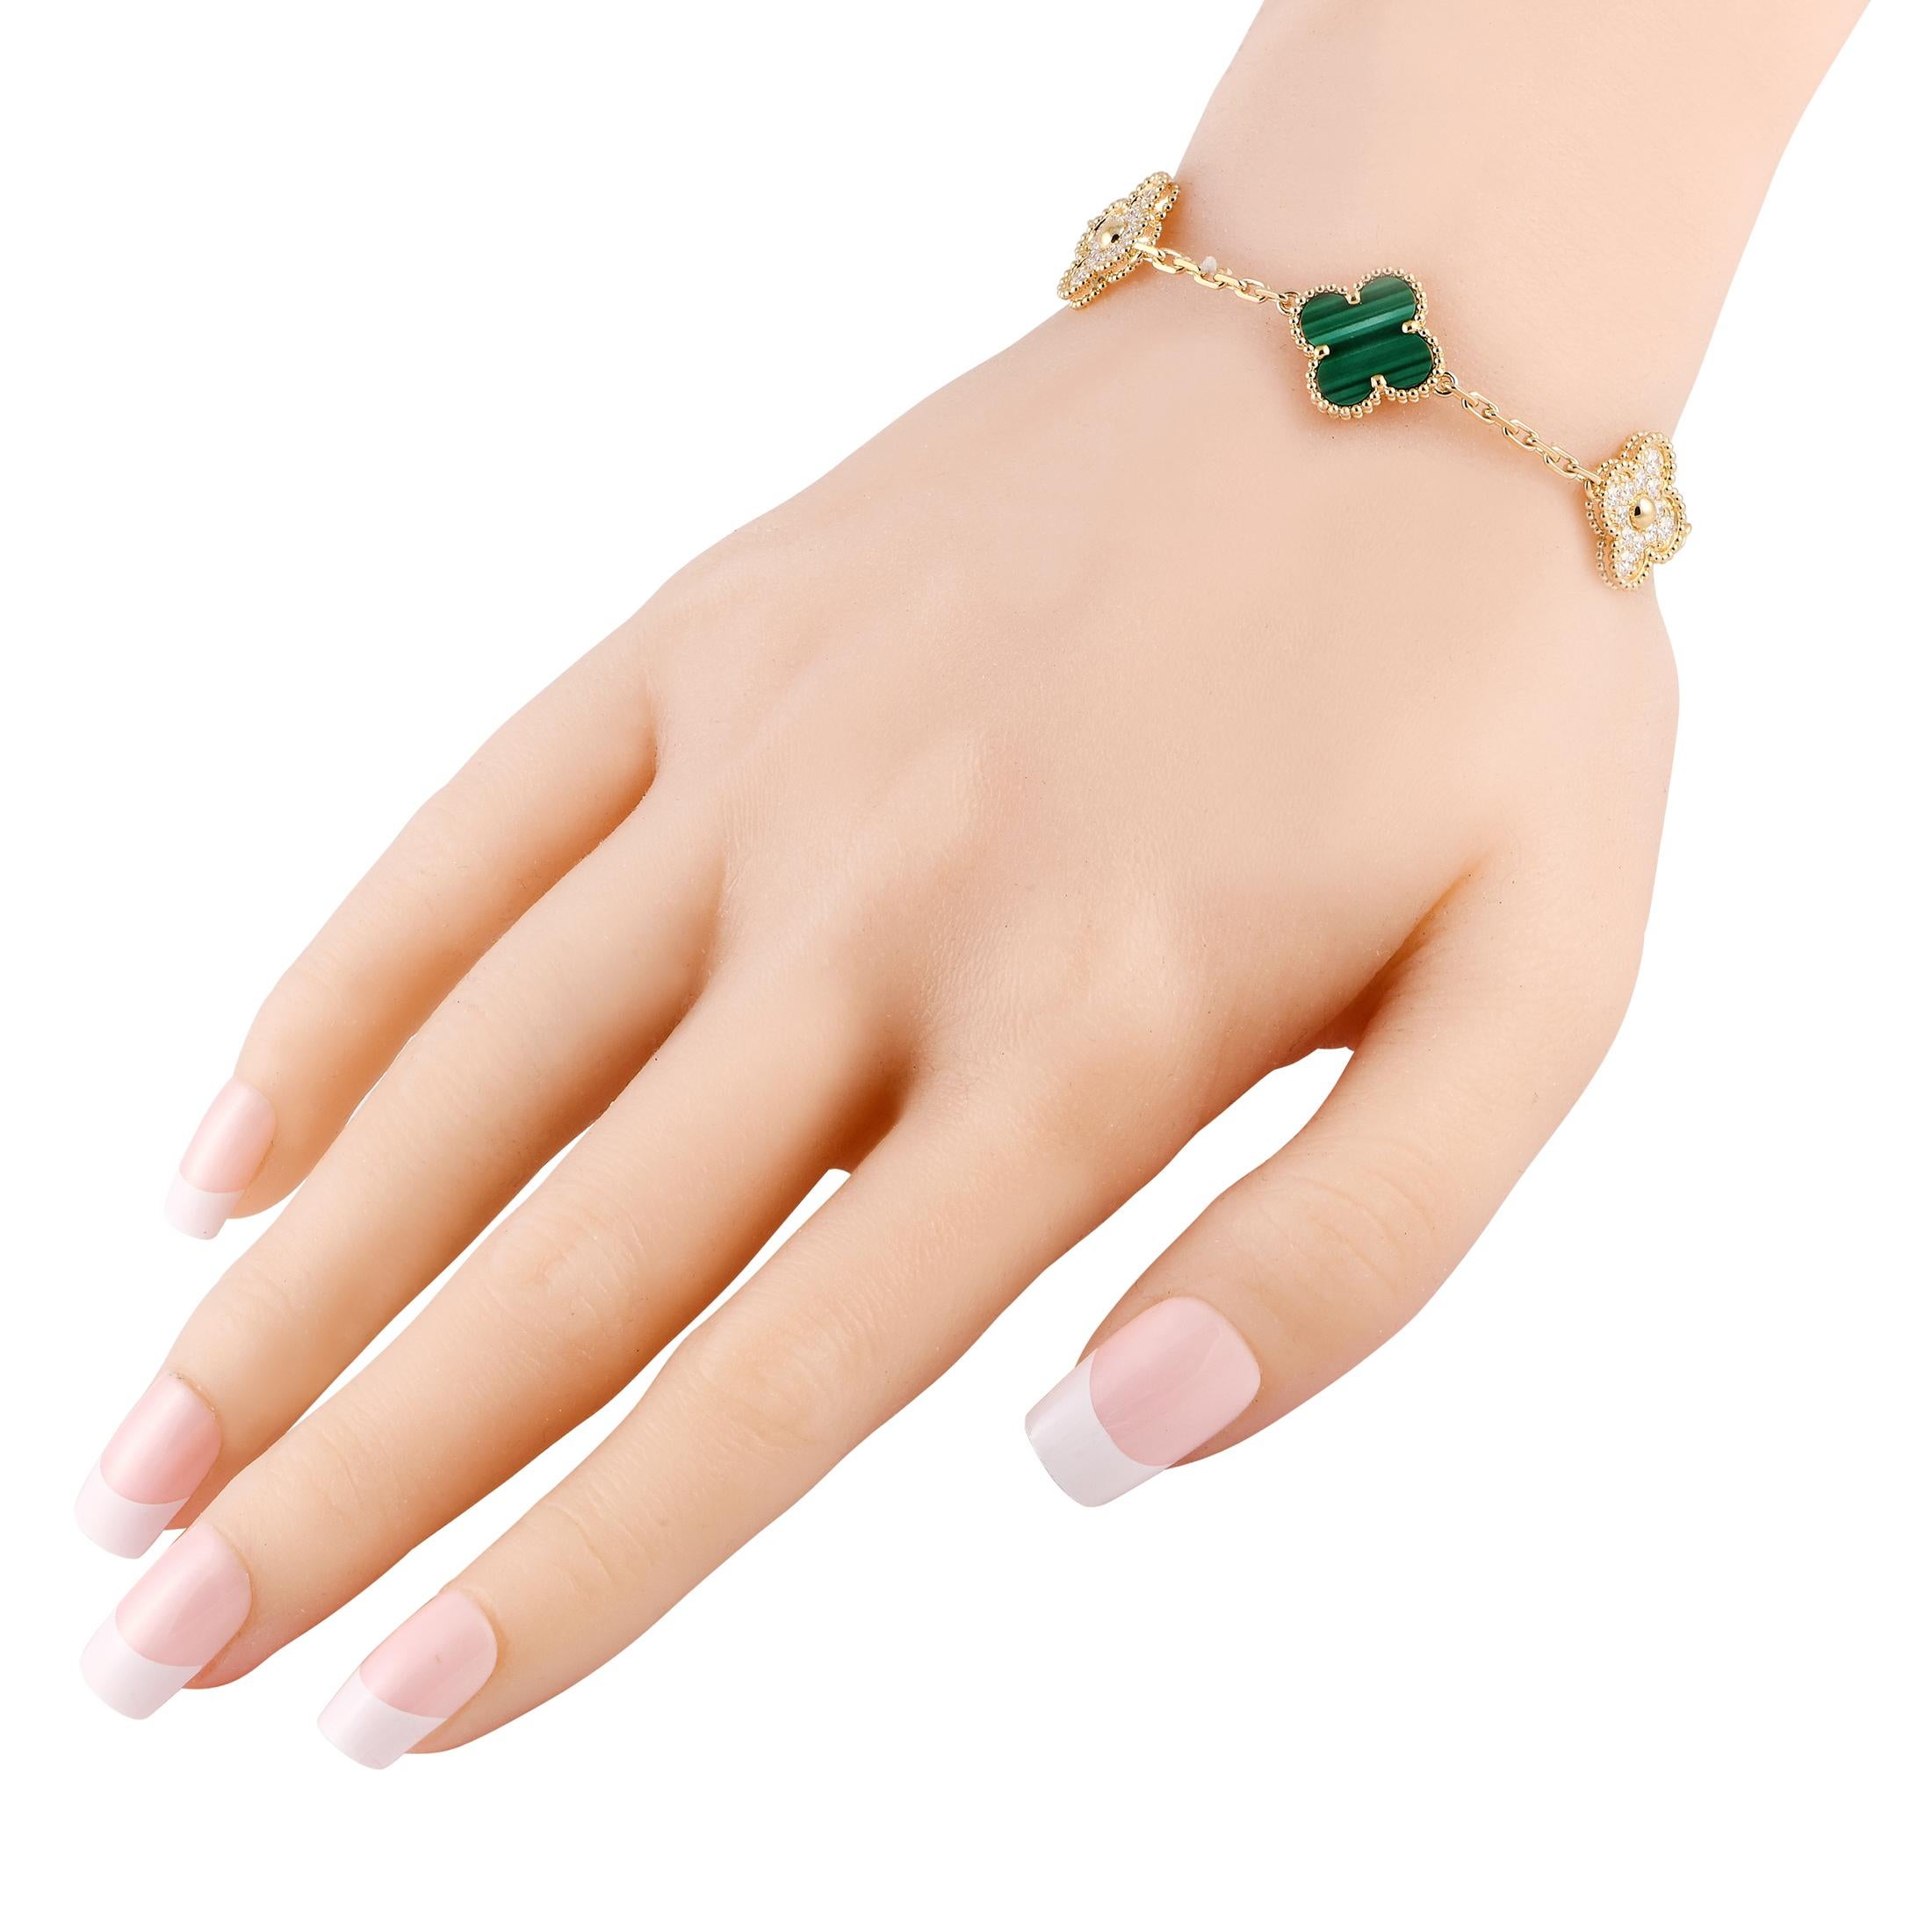 On this elegant Van Cleef & Arpels Alhambra bracelet, the luxury brands iconic clover motifs make a statement on a delicate chain measuring 6.5 long. Green Malachite stones and sparkling Diamonds totaling 0.96 carats contrast beautifully against the